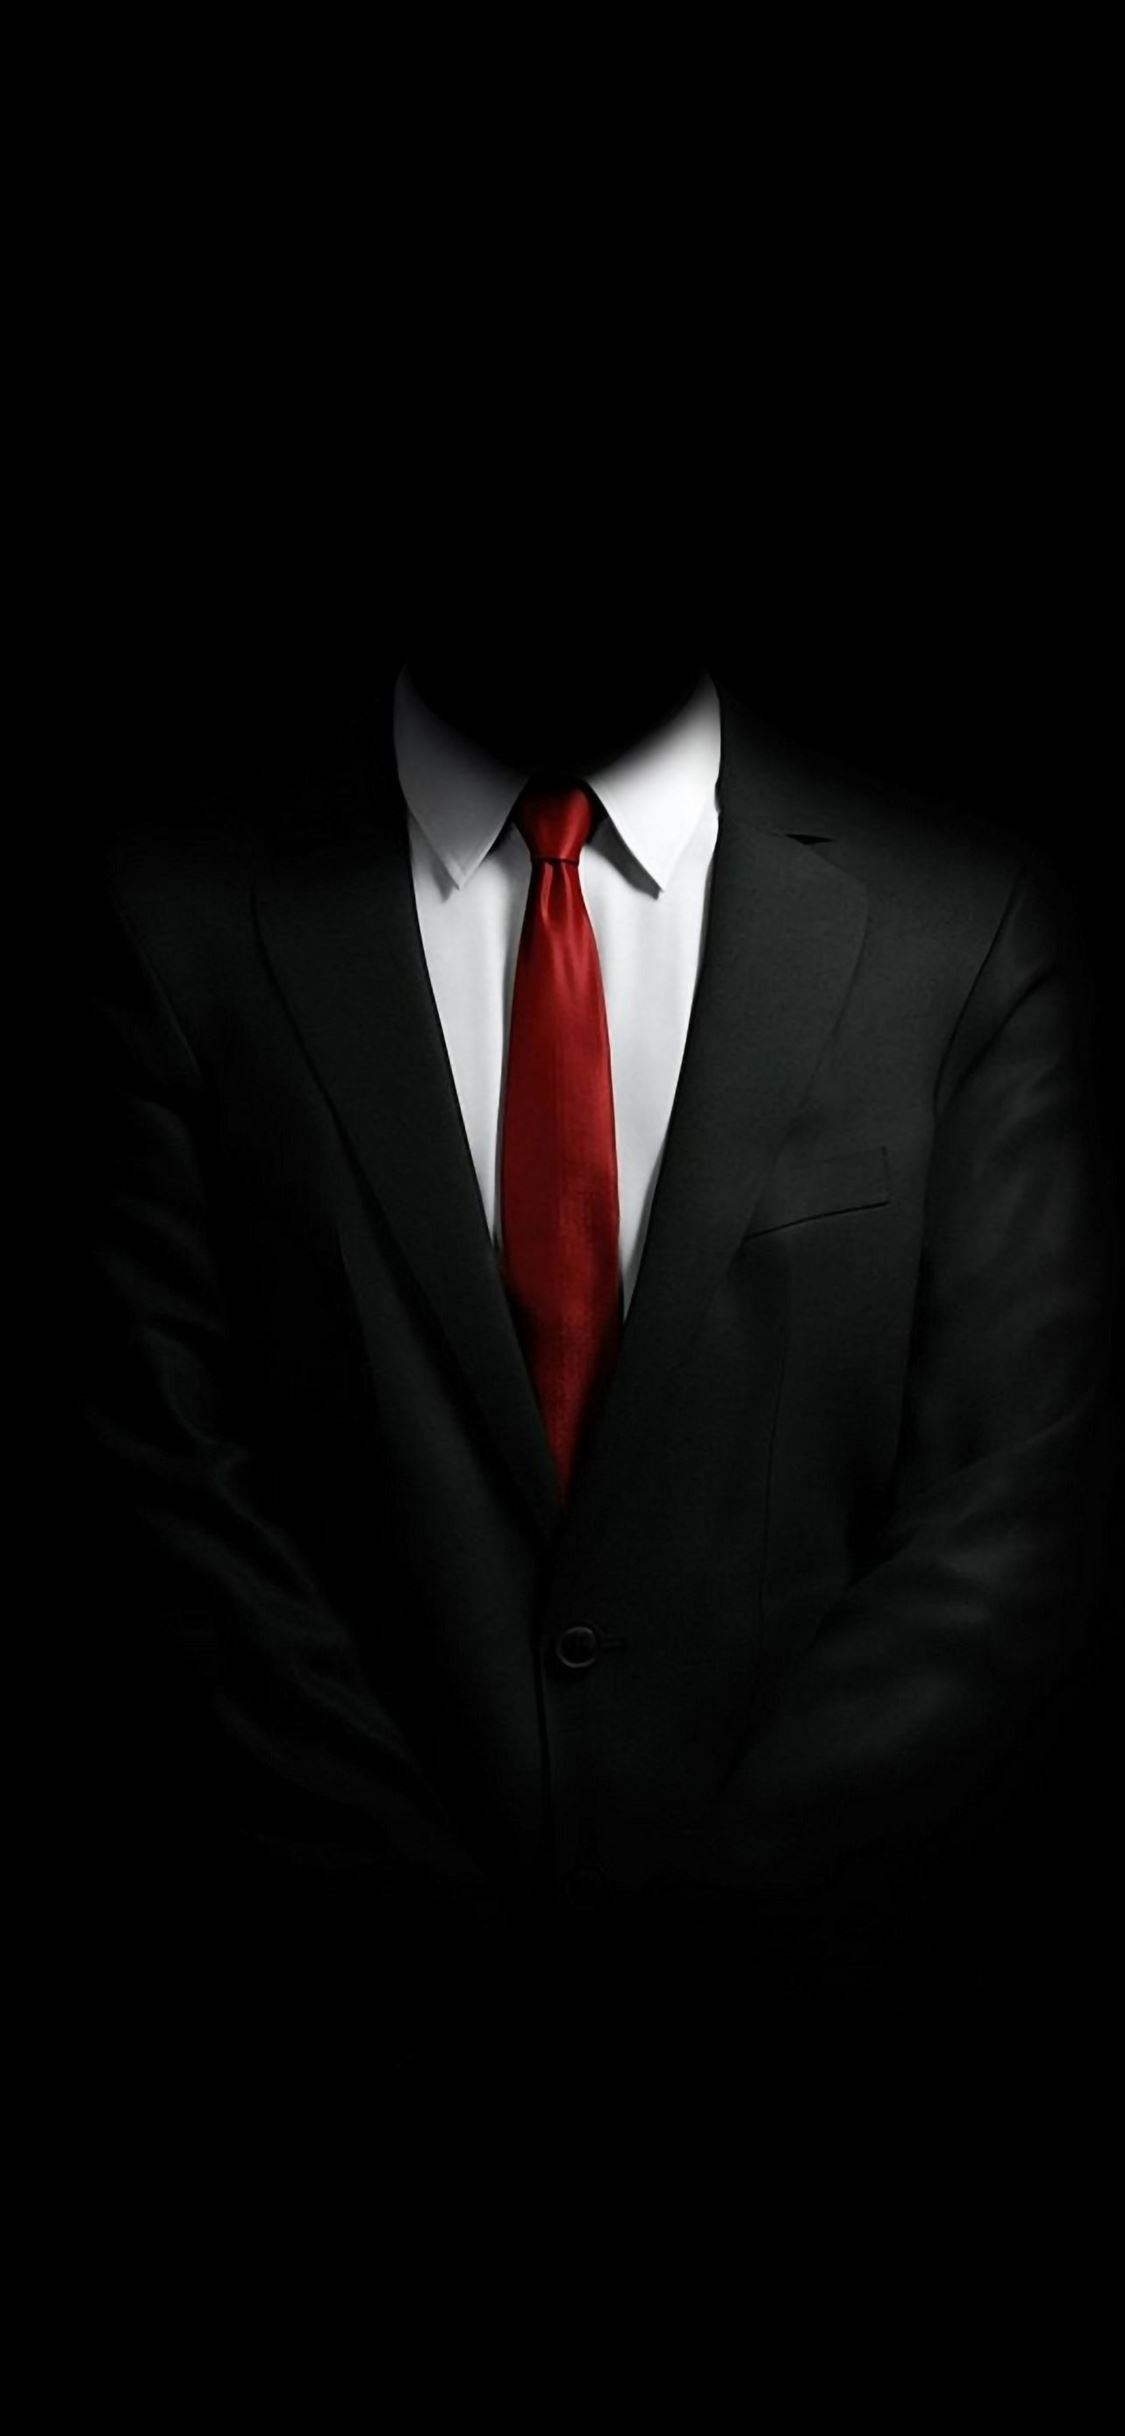 Mystery Man In Suit iPhone wallpaper 